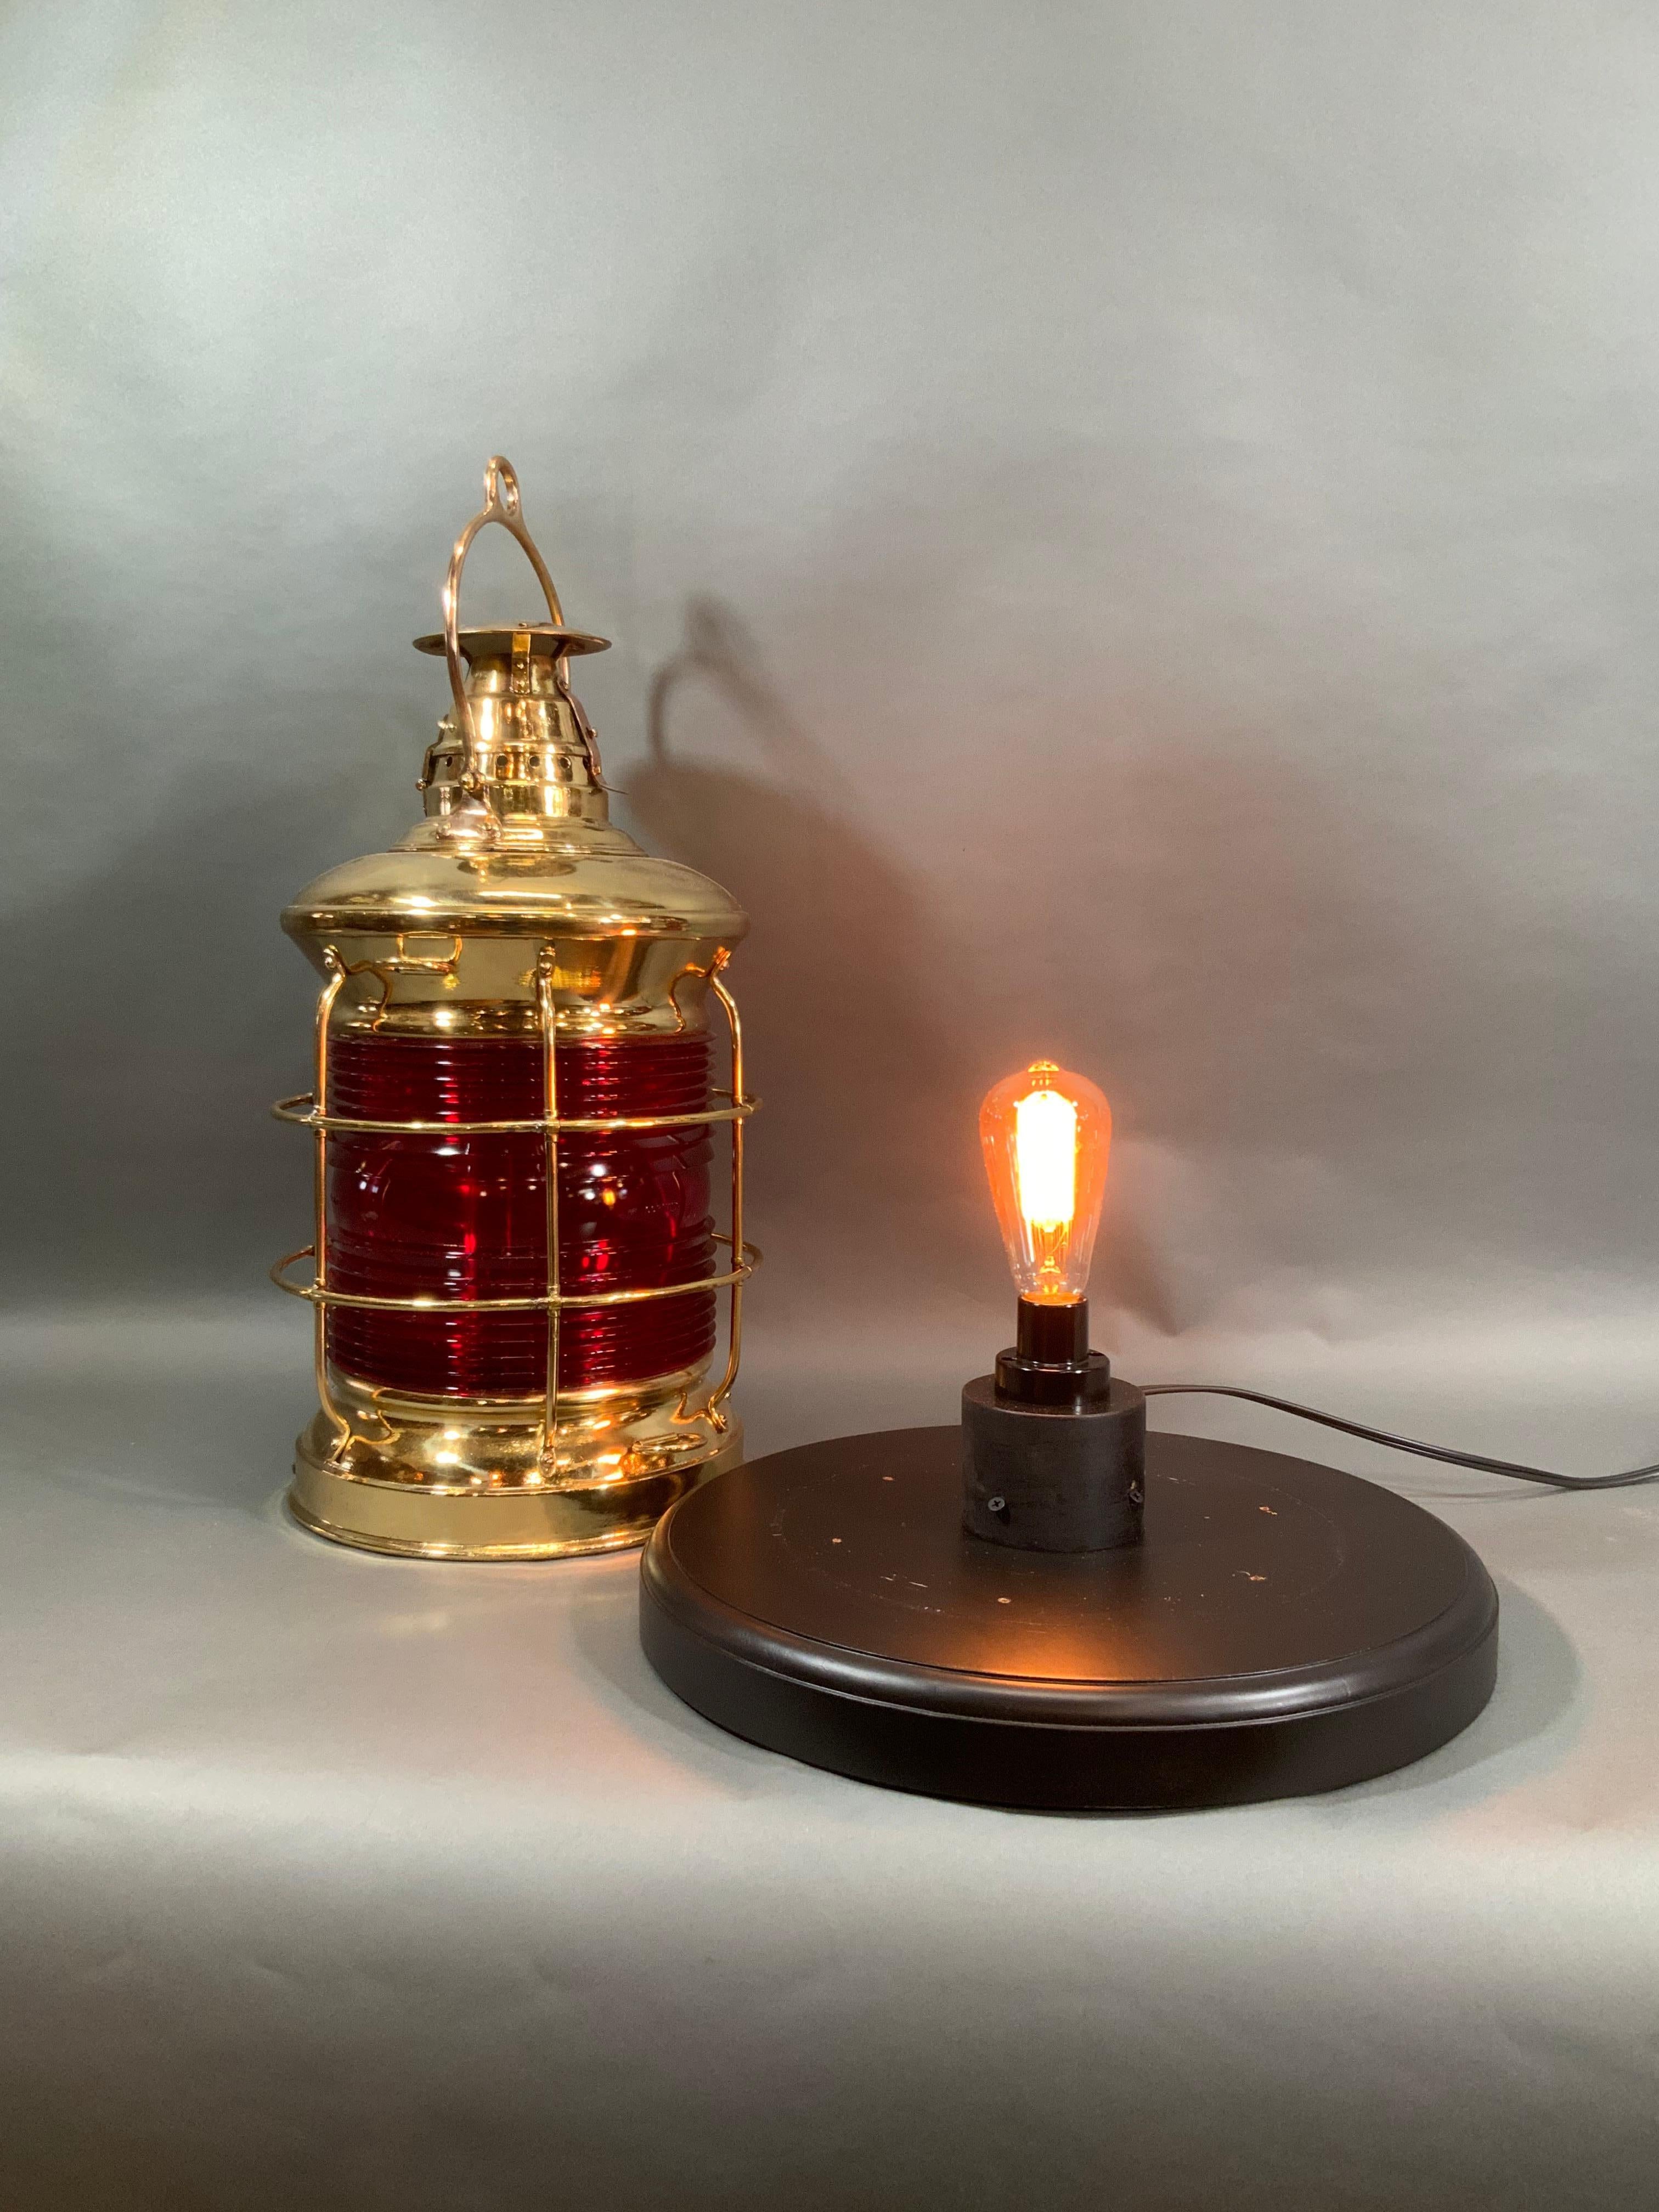 American Solid Brass Ship's Lantern by F.H. Lovell Co. of Arlington, New Jersey For Sale